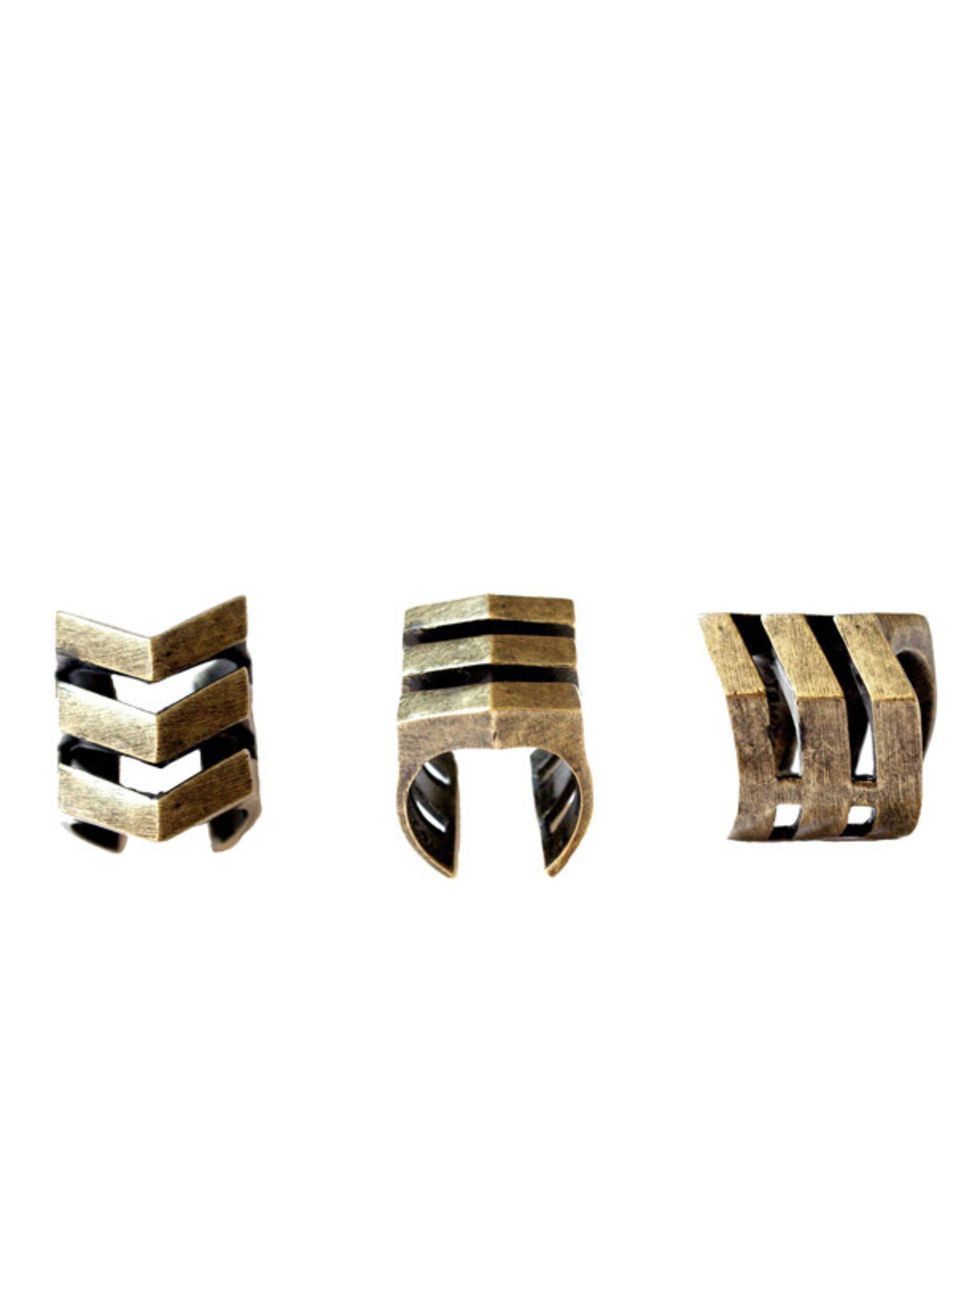 <p>Hot new label alert! LA jewellery brand Tom Tom has just landed on UK shores, and weve instantly fallen for its geometric rings Tom Tom chevron ring, £75, at <a href="http://www.nylaboutique.com/item.aspx?product_id=10139">Nyla Boutique </a></p>